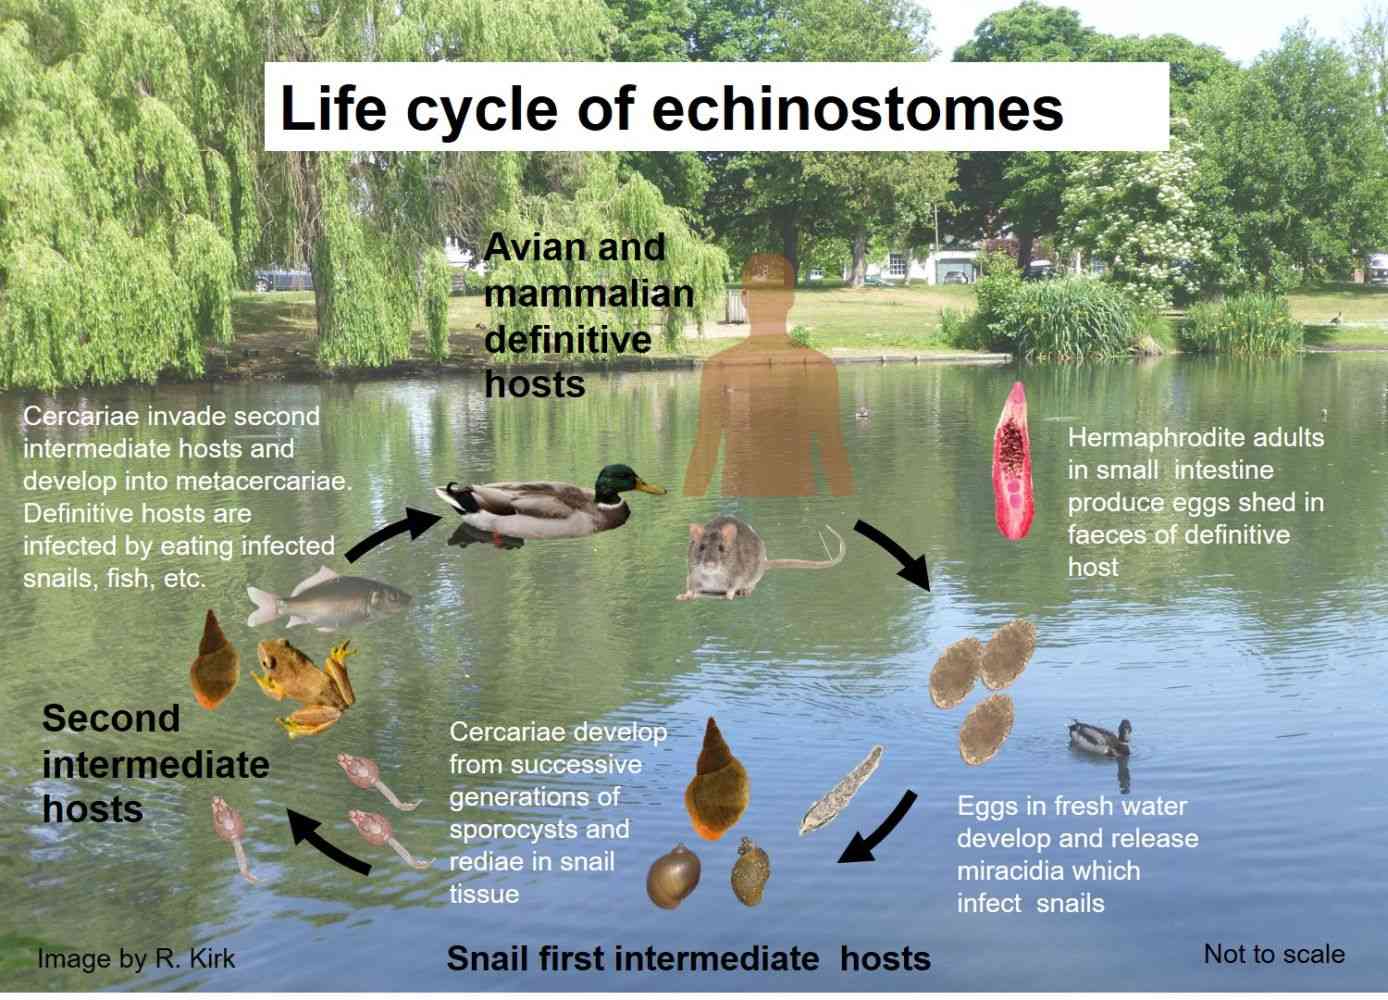 Life cycle of echinostomes - Many types of echinostome parasites  cause a gastrointestinal disease known as echinostomiasis. People can be infected when they eat infected raw or undercooked aquatic products like fish or molluscs.